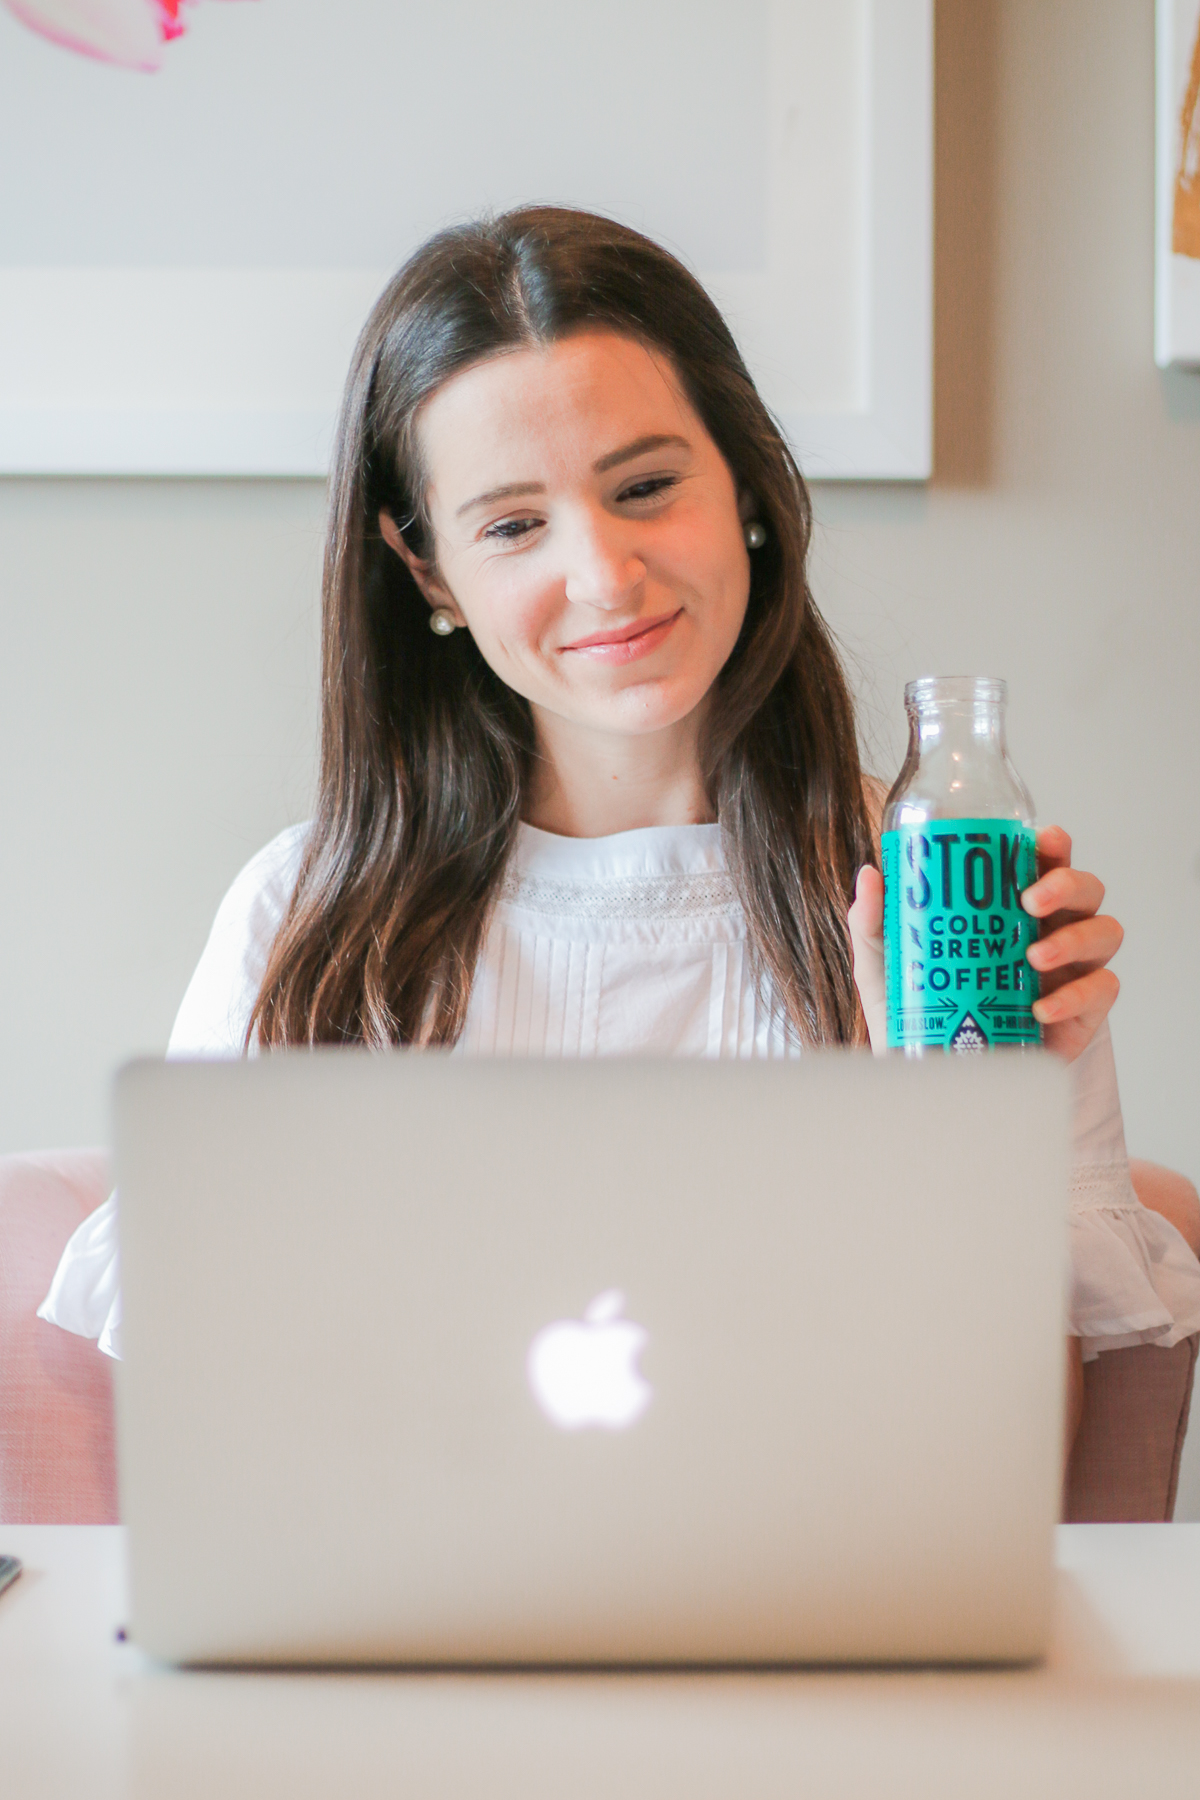 How to Become a Full Time Blogger: A Simple 5-Step Guide by full time fashion blogger Stephanie Ziajka from Diary of a Debutante, tips for becoming a full time blogger, how to make blogging a full time job, Stok cold brew coffee review